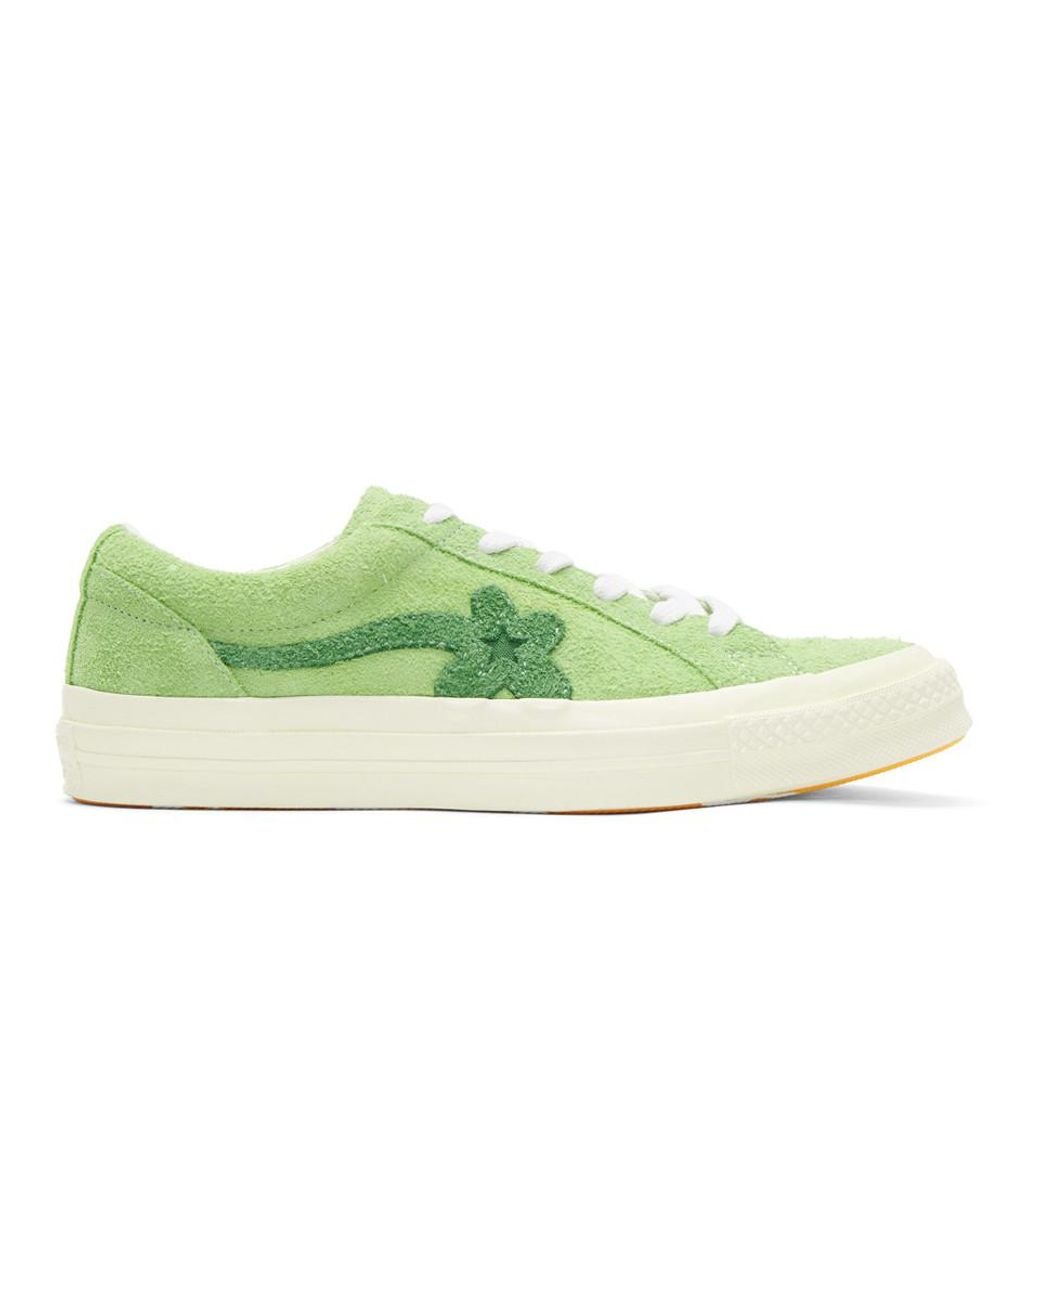 Converse Green Golf Le Fleur Edition One Star Sneakers | Lyst